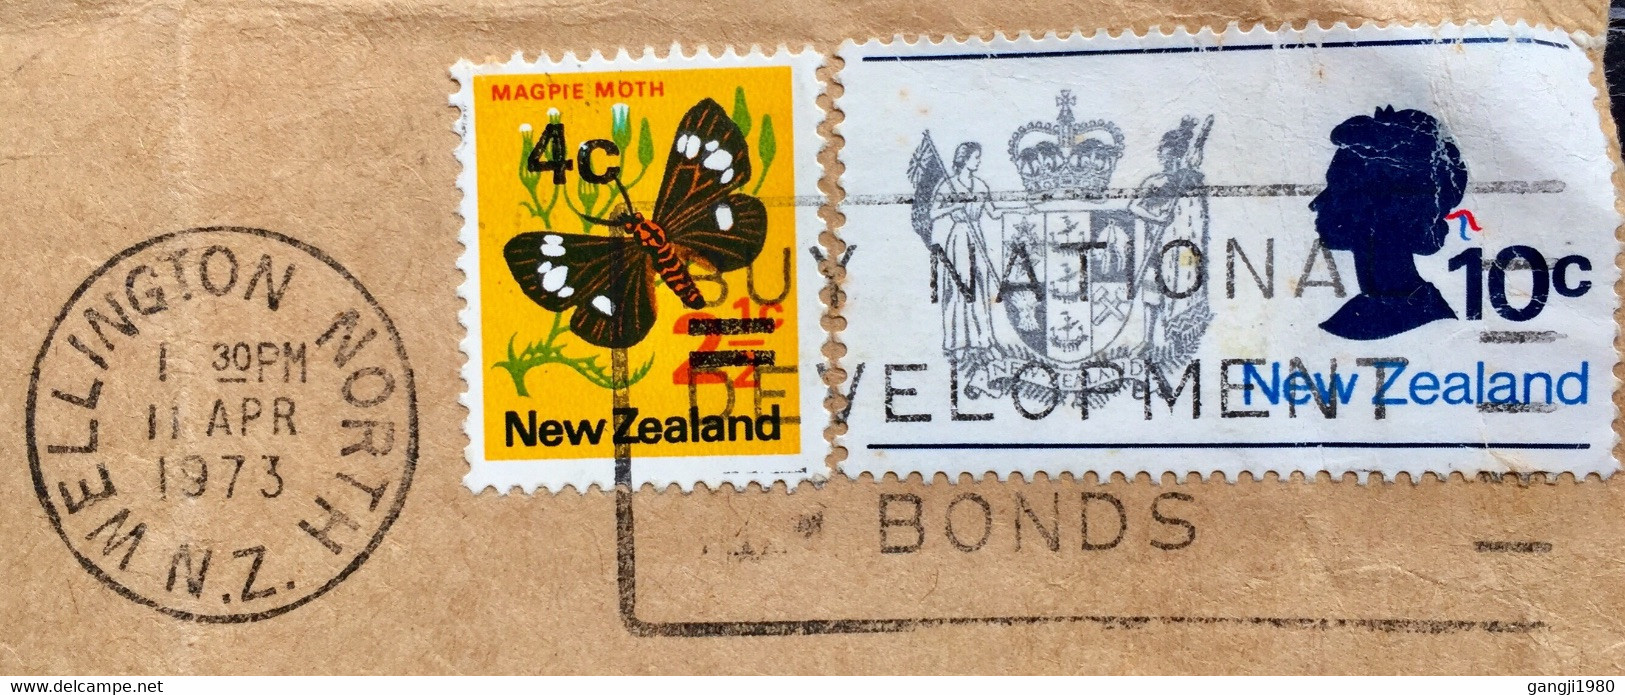 NEW ZEALAND 1973 ,BUY NATIONAL DEVELOPMENT BONDS SLOGAN,EMBASSY OF INDONESIA,USED COVER BUTTERFLY,EAGLE,QUEEN - Lettres & Documents